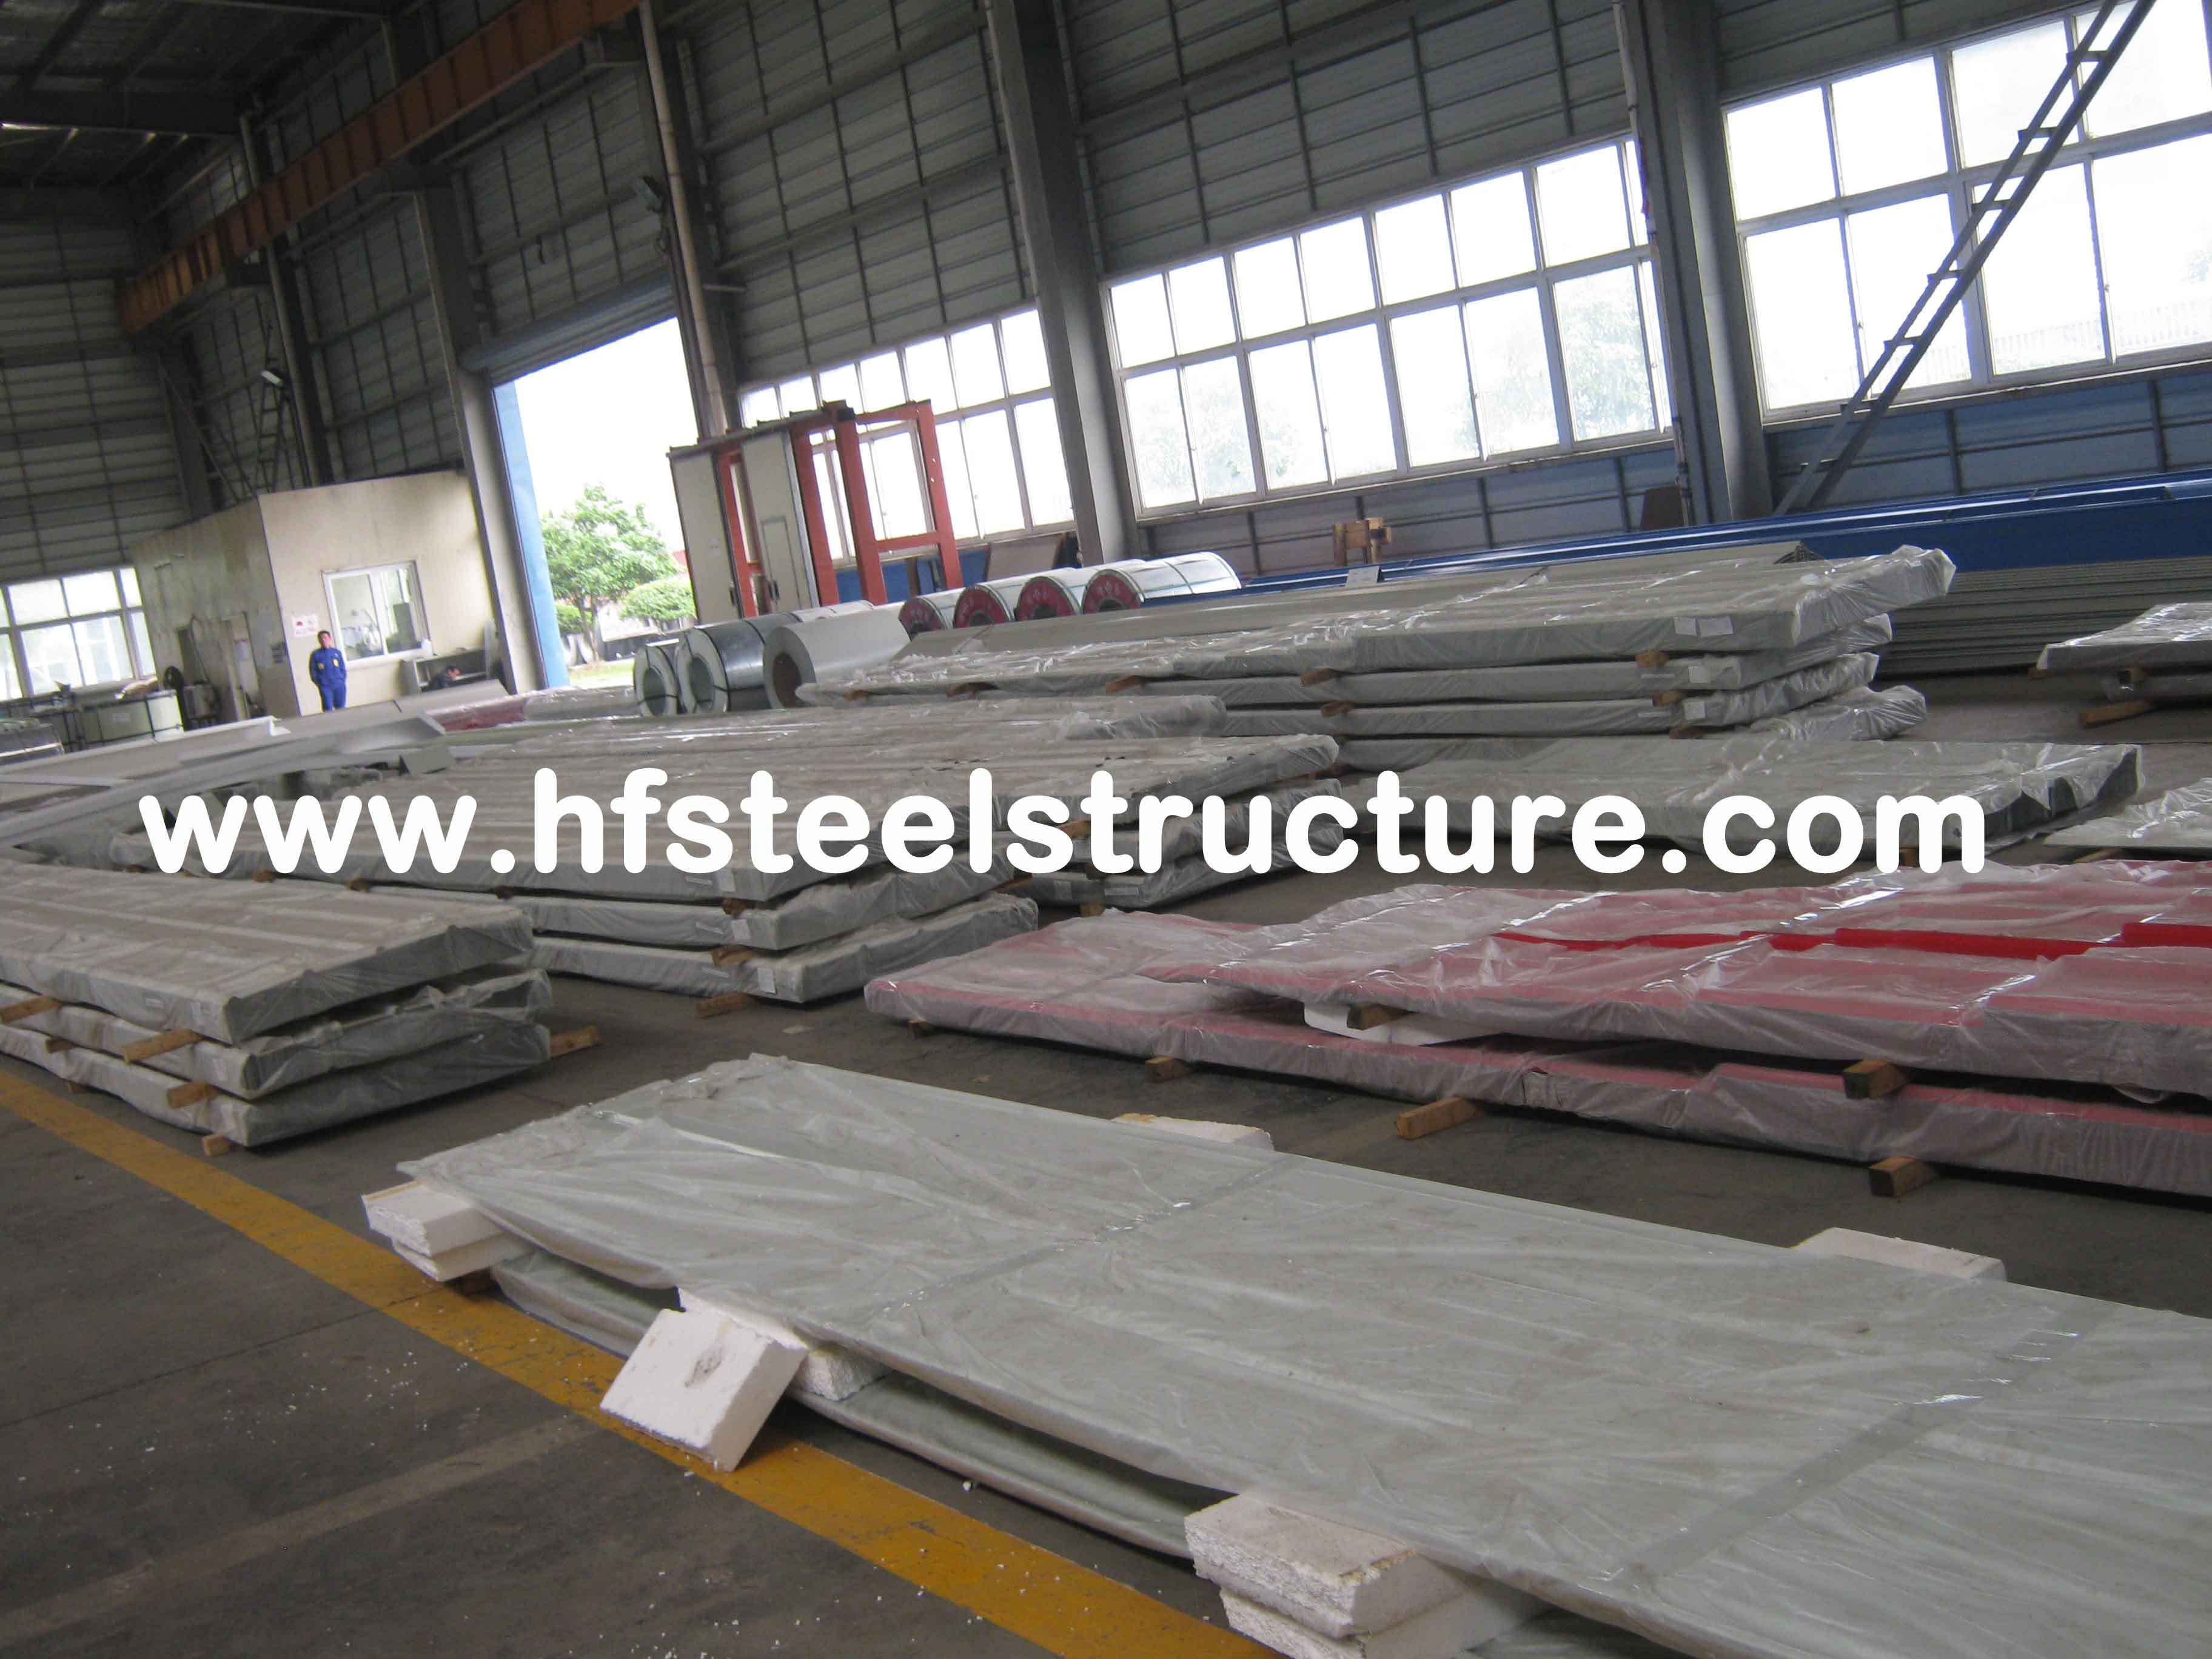 Light Weight Metal Roofing Sheets Waterproof Glazed Tile Shaped